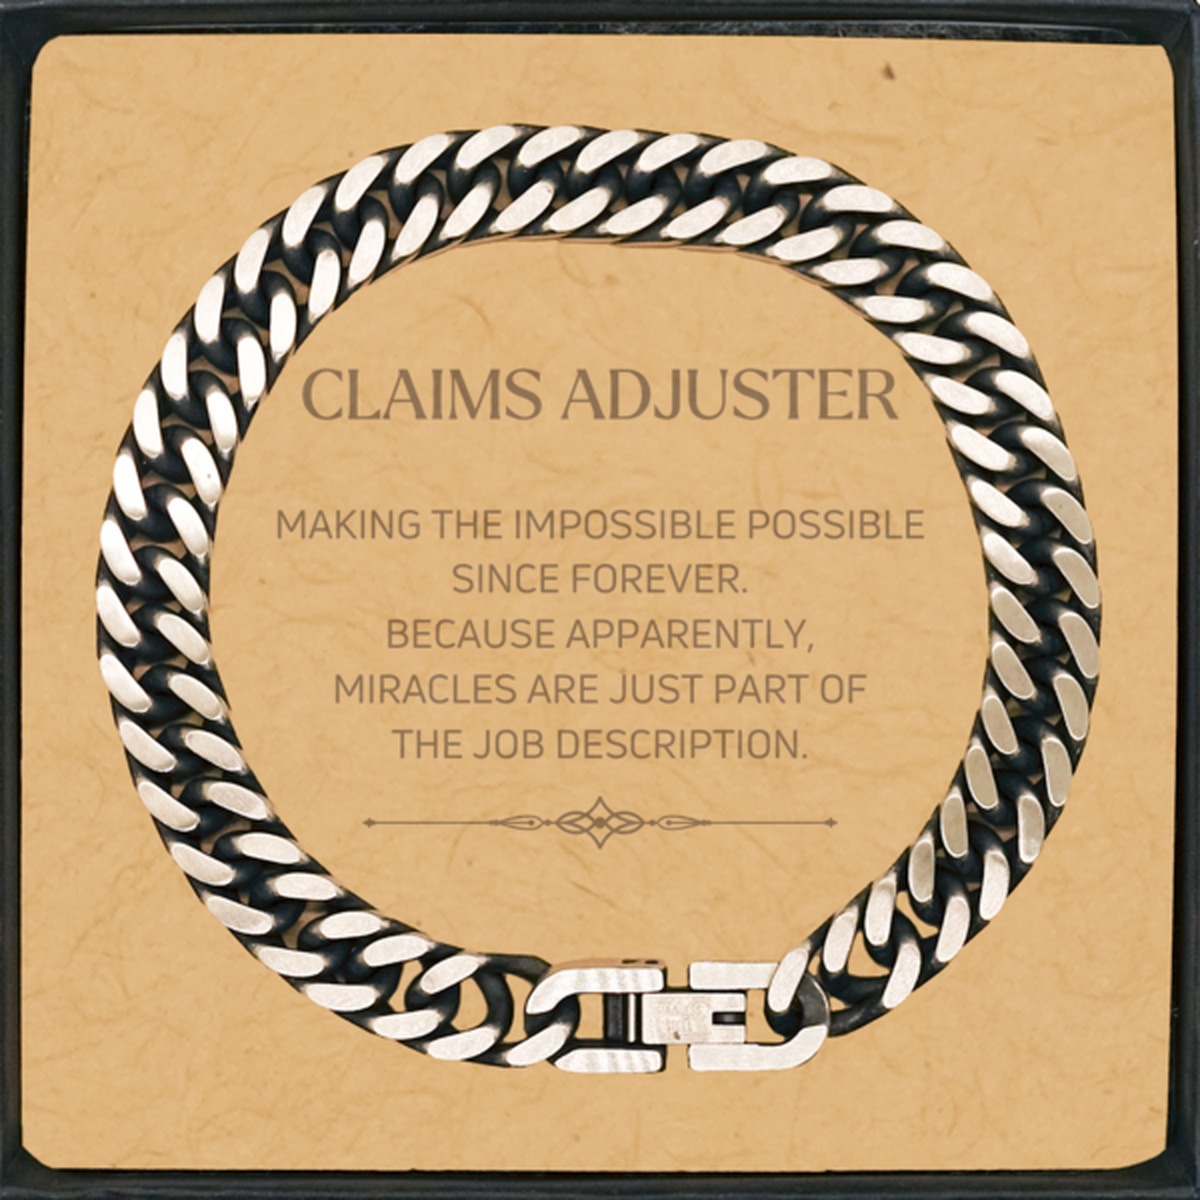 Funny Claims Adjuster Gifts, Miracles are just part of the job description, Inspirational Birthday Cuban Link Chain Bracelet For Claims Adjuster, Men, Women, Coworkers, Friends, Boss